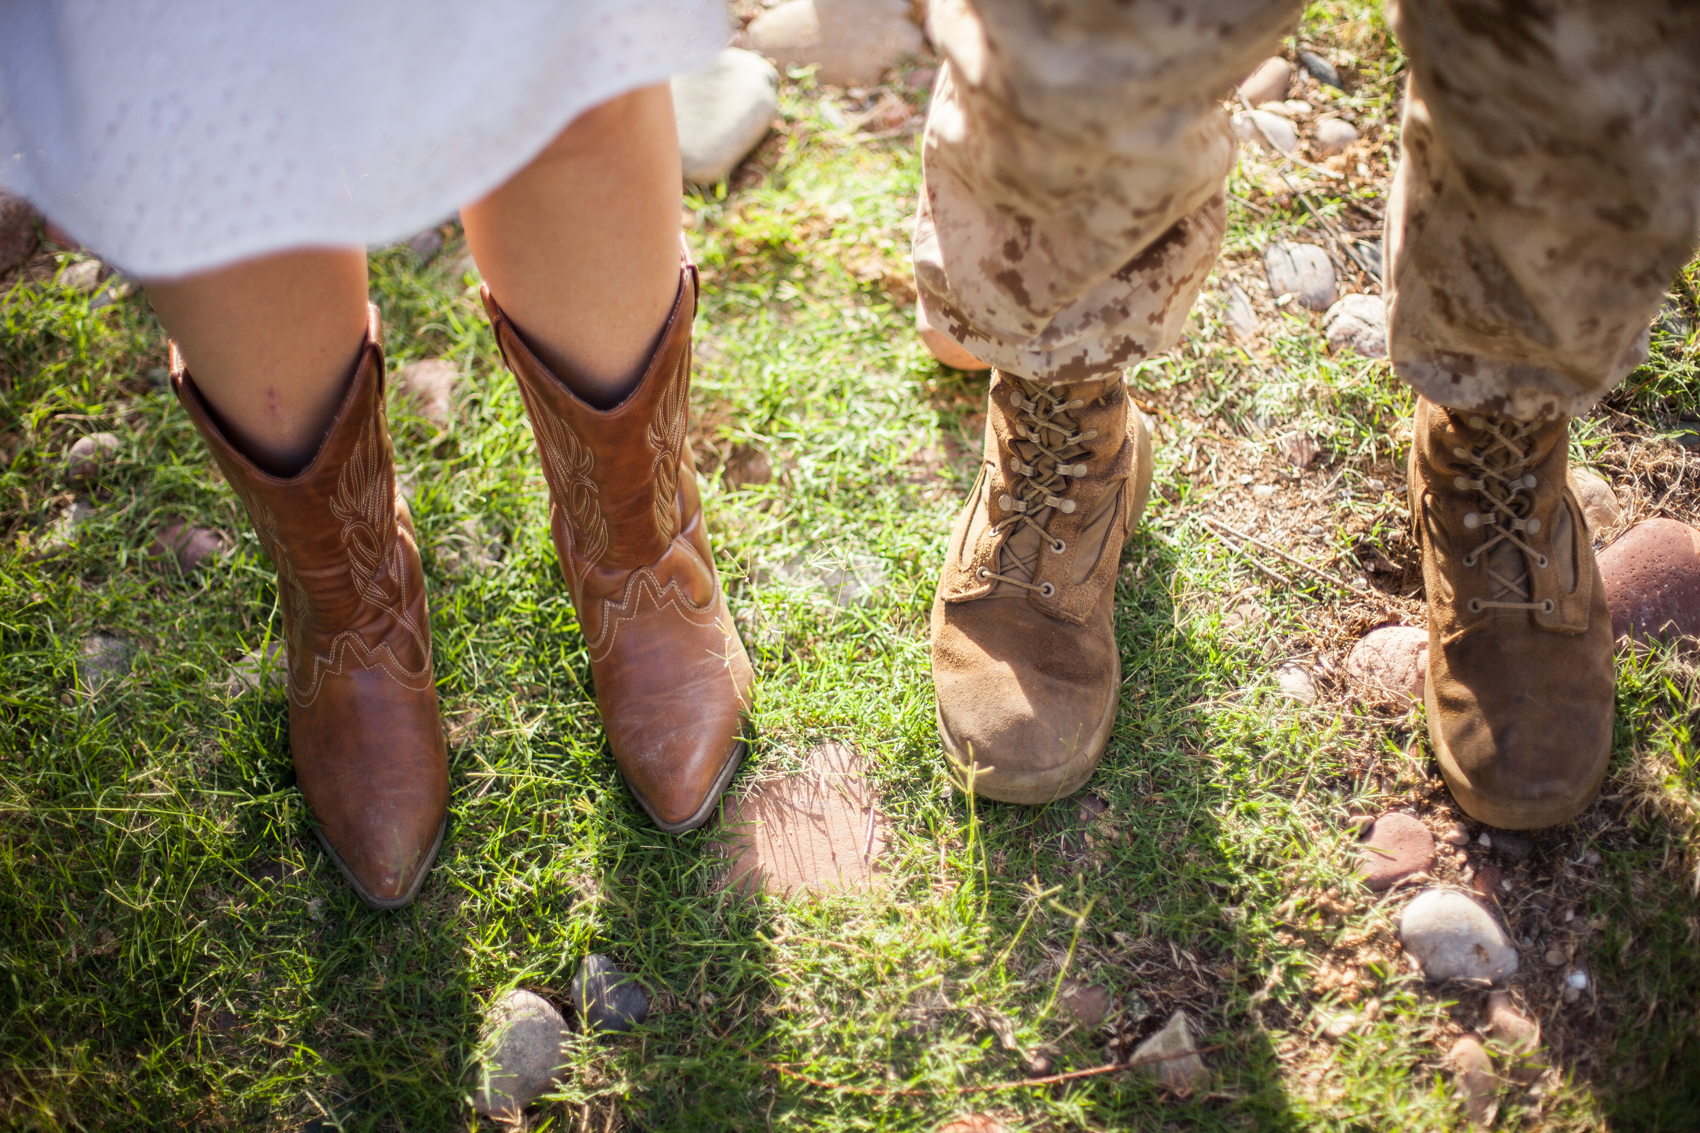 cowgirl boots and marine boots in the grass and dirt